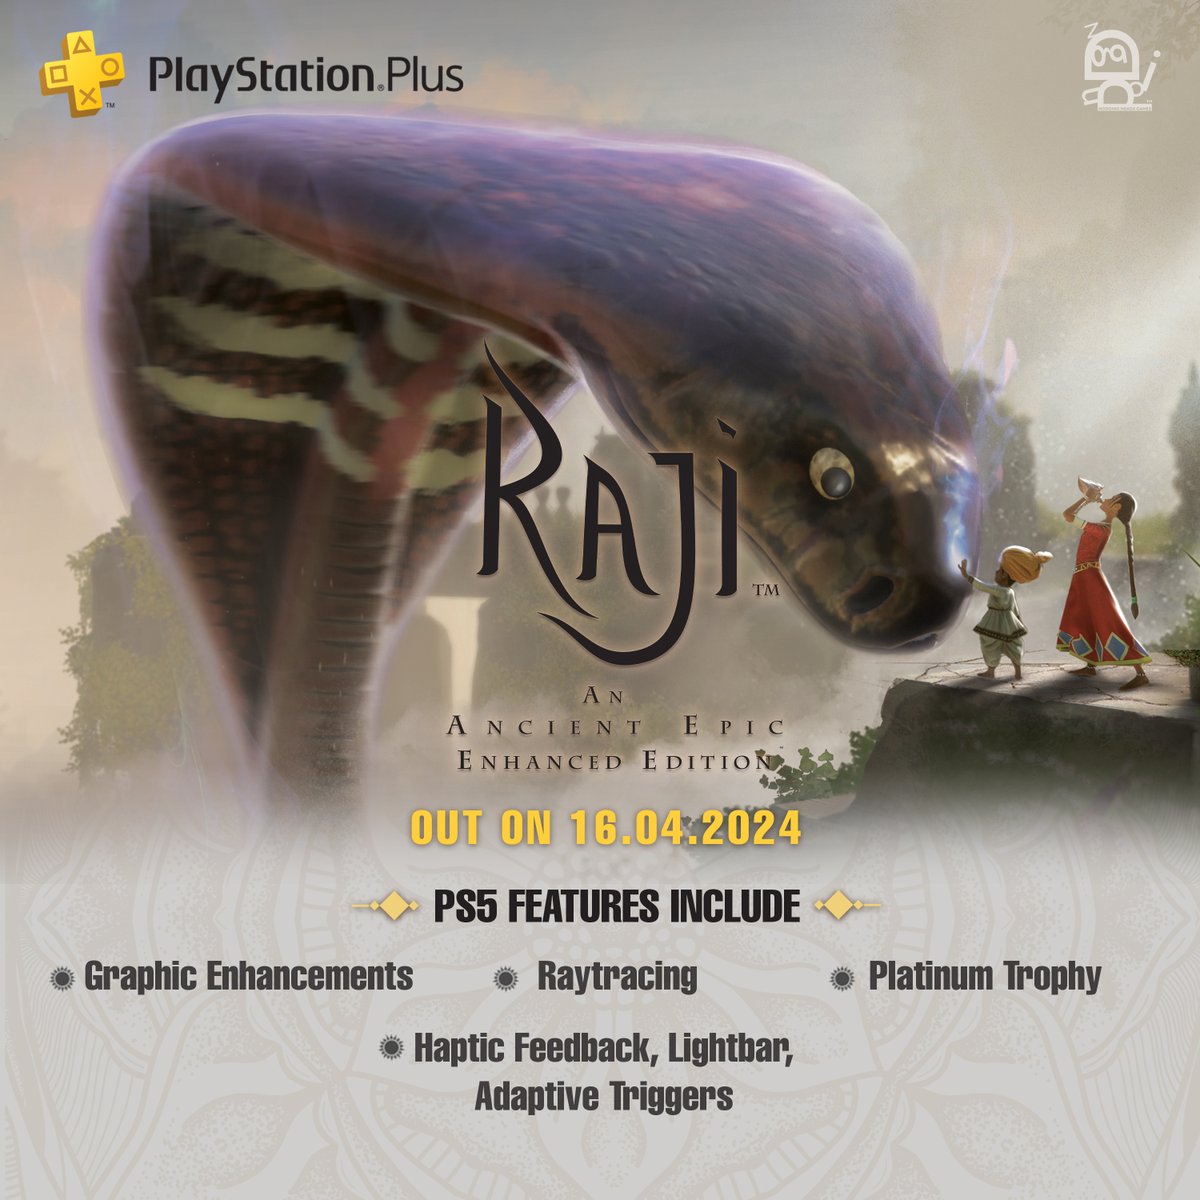 Good news everyone!! 🥳 Raji: An Ancient Epic will launch on PS5 and PS+ on April 16th! The PS5 version includes raytracing, a platinum trophy, haptic feedback, a lightbar, adaptive triggers, and graphic enhancements! #PS5 #rajithegame #indiegames #gamedev #playstationplus